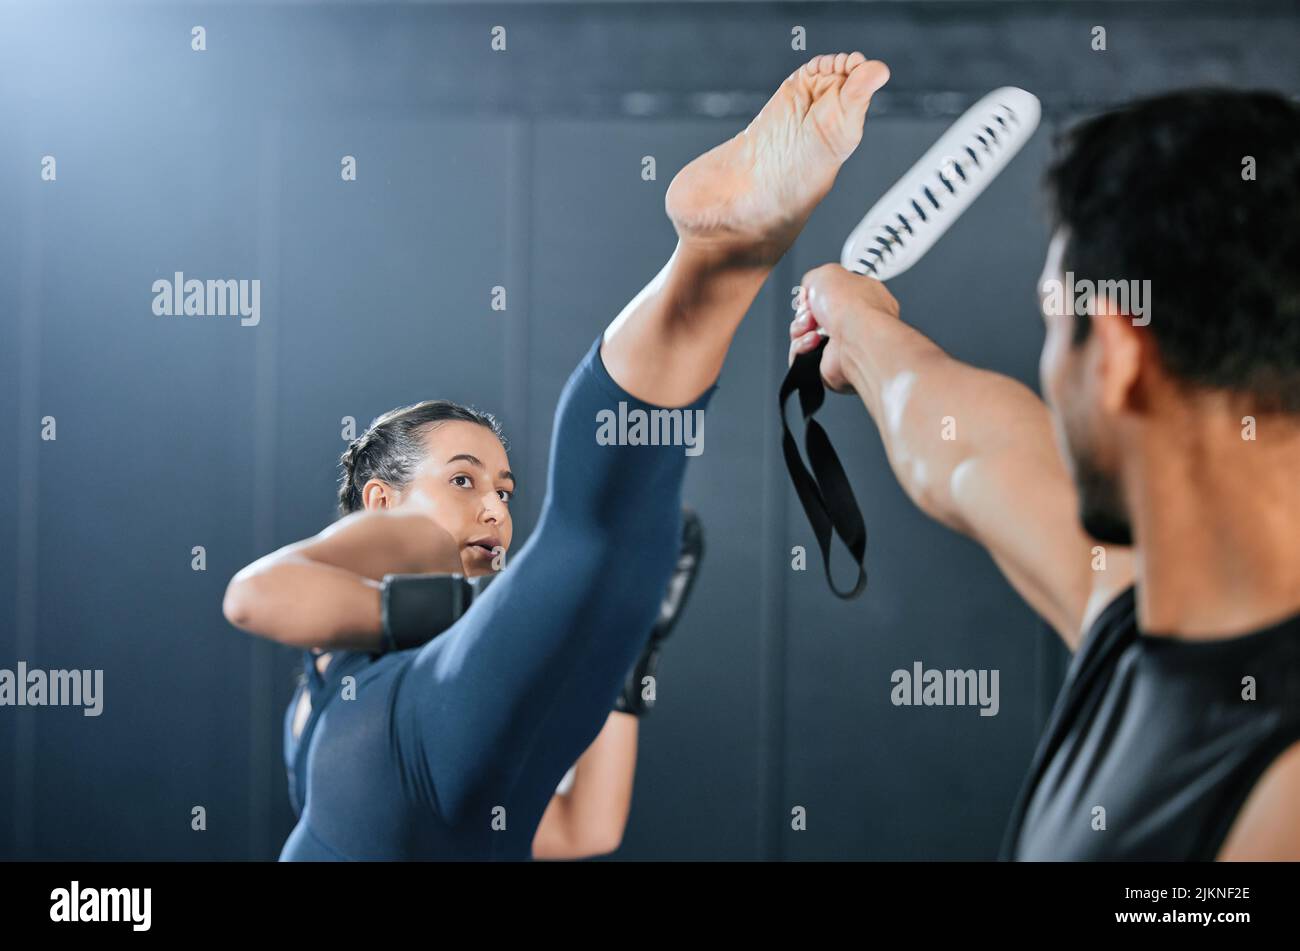 Fit, active and strong woman doing exercise, workout and training while kickboxing with instructor at a gym. Confident female athlete kicking, doing Stock Photo